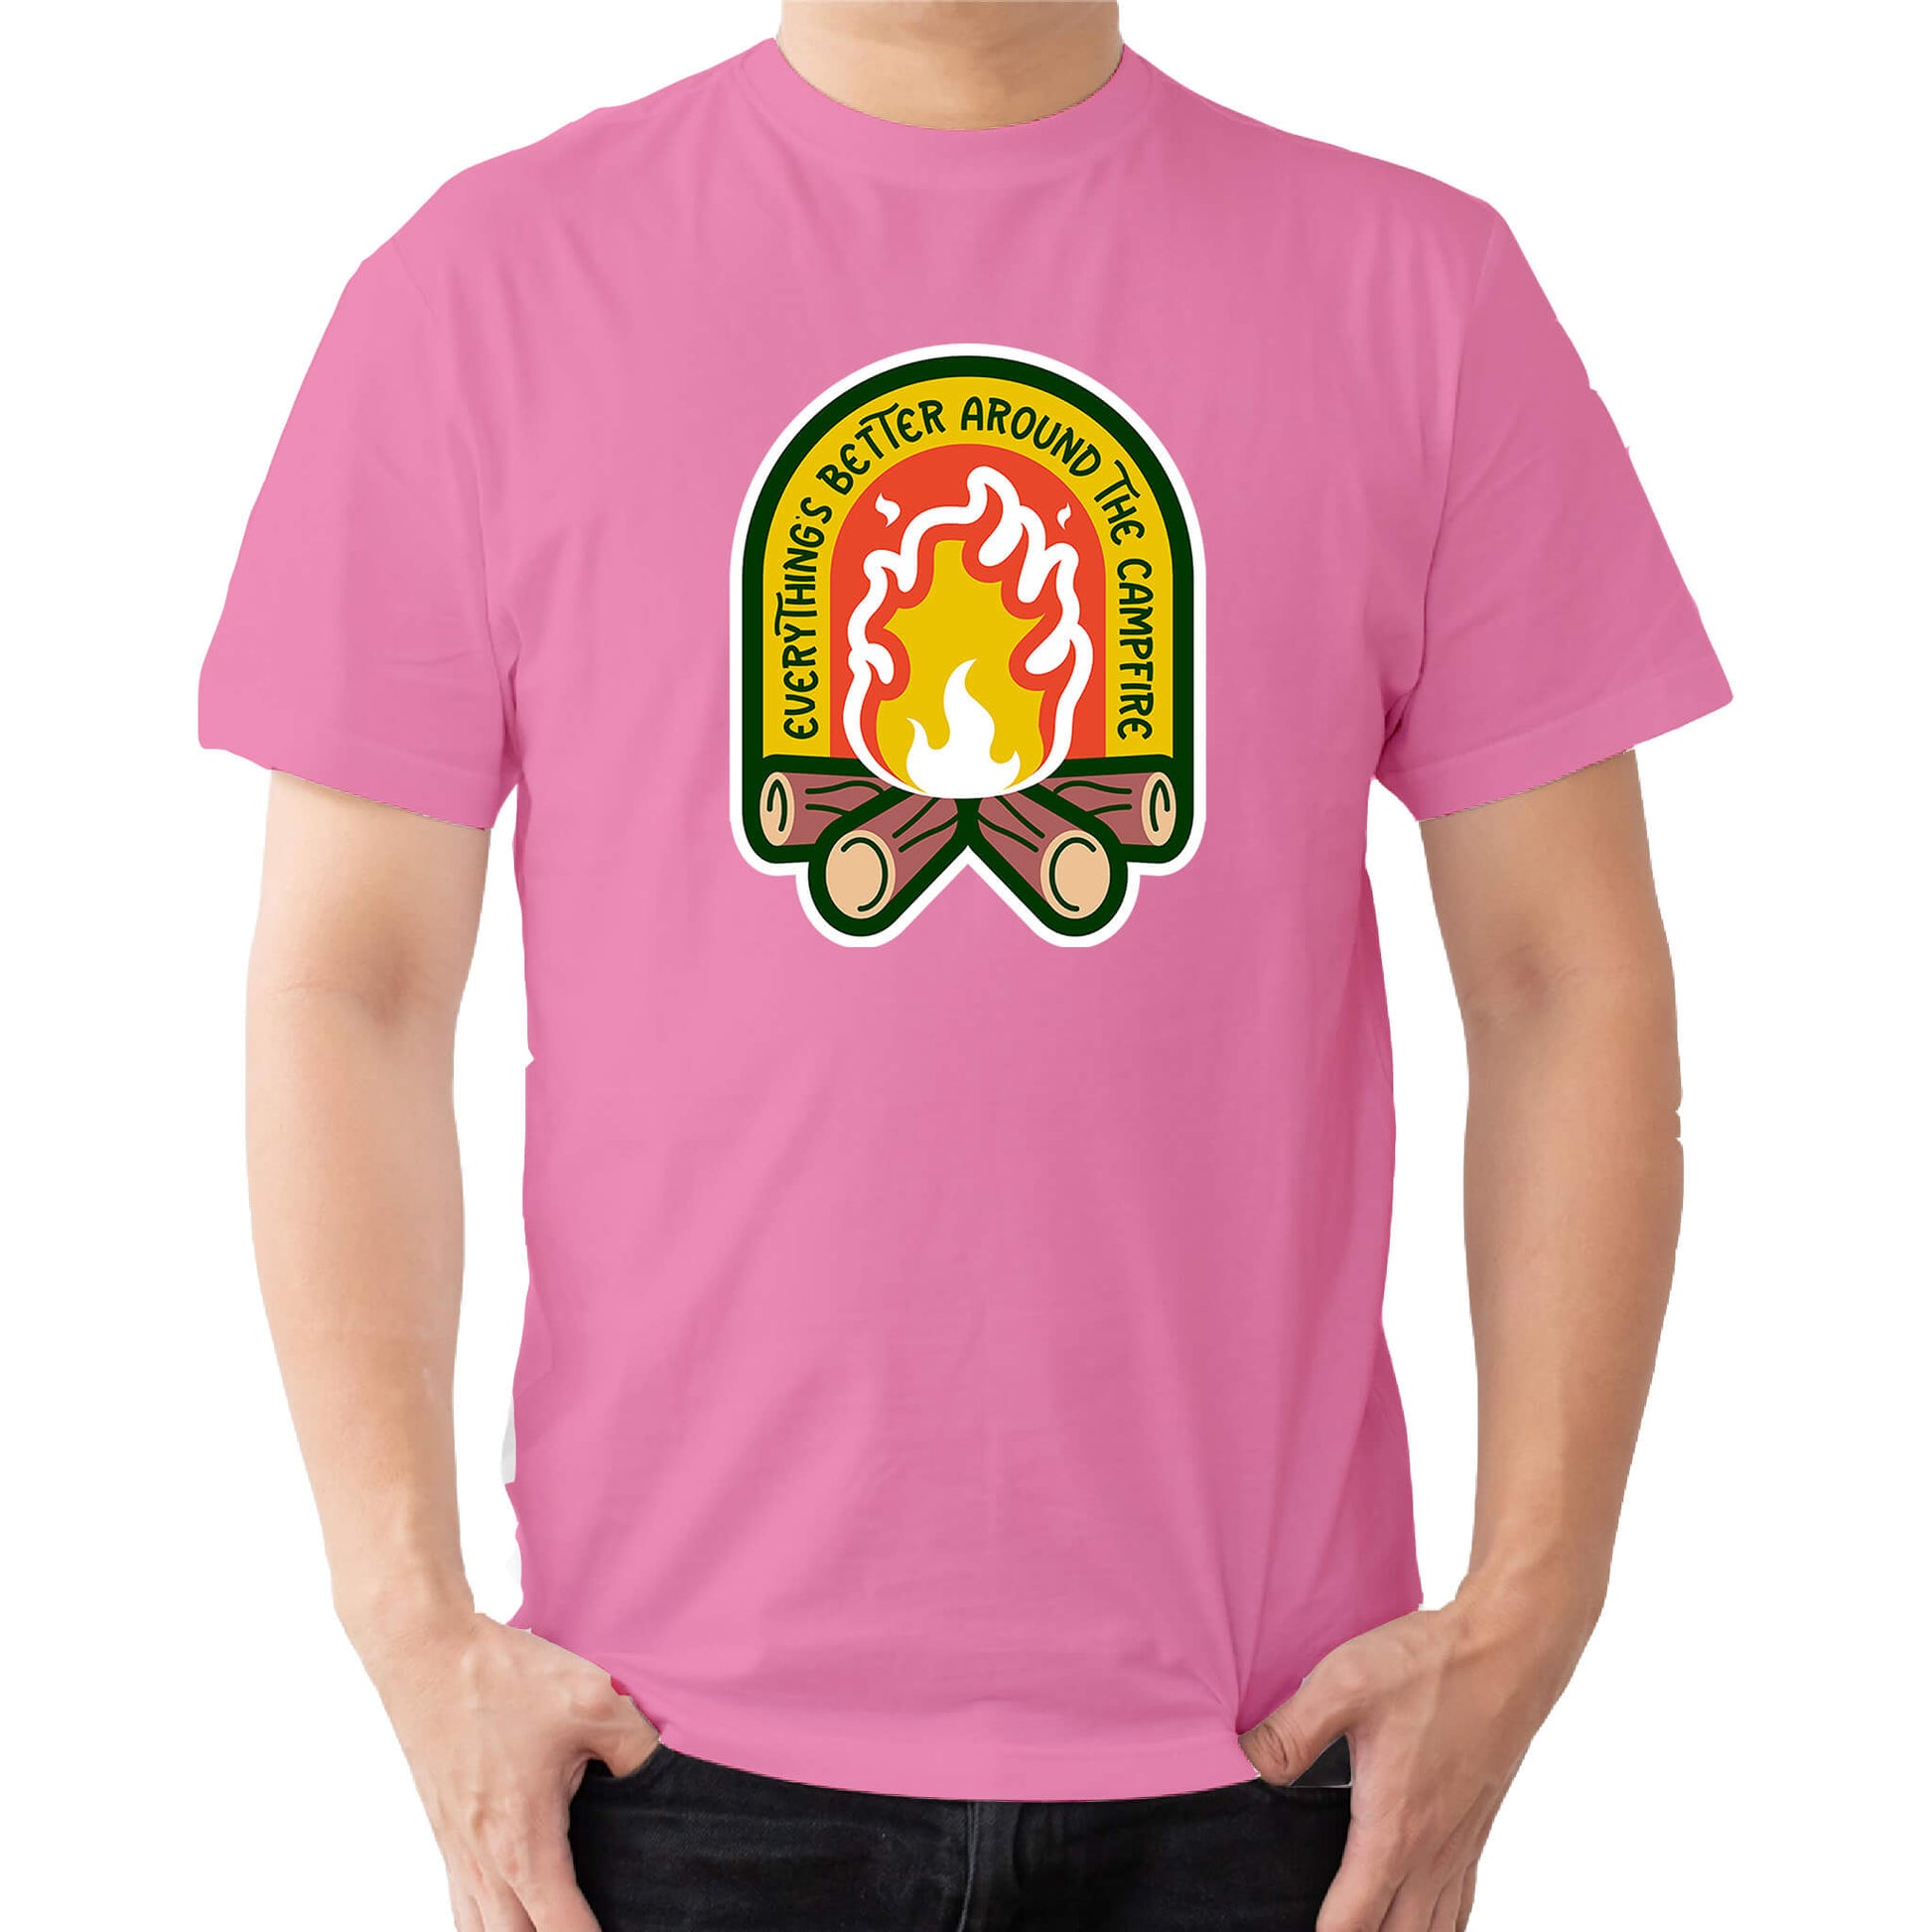 "Pink Cozy tee featuring a campfire image, perfect for outdoor enthusiasts. Text says: 'Everything is better around the campfire.' Embrace the warmth and camaraderie!"